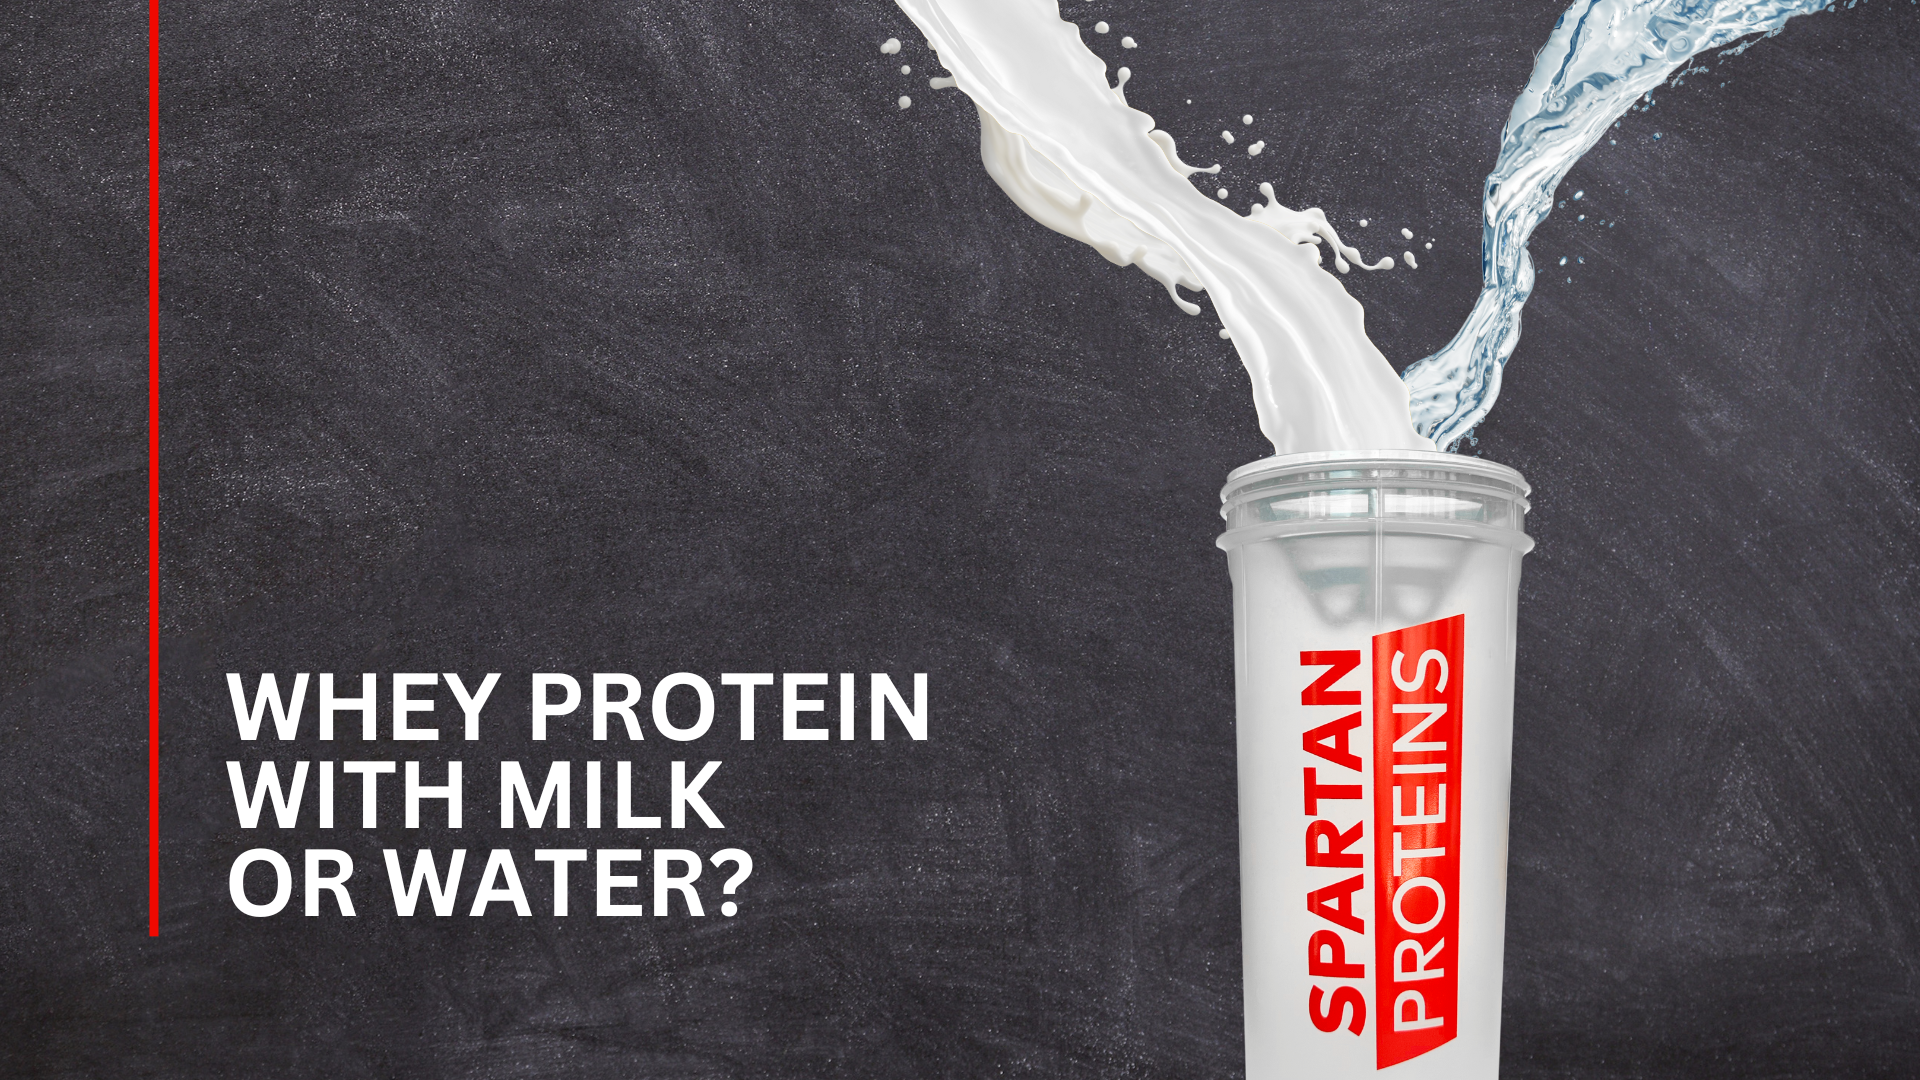 Should We Consume Whey Protein With Milk Or Water?